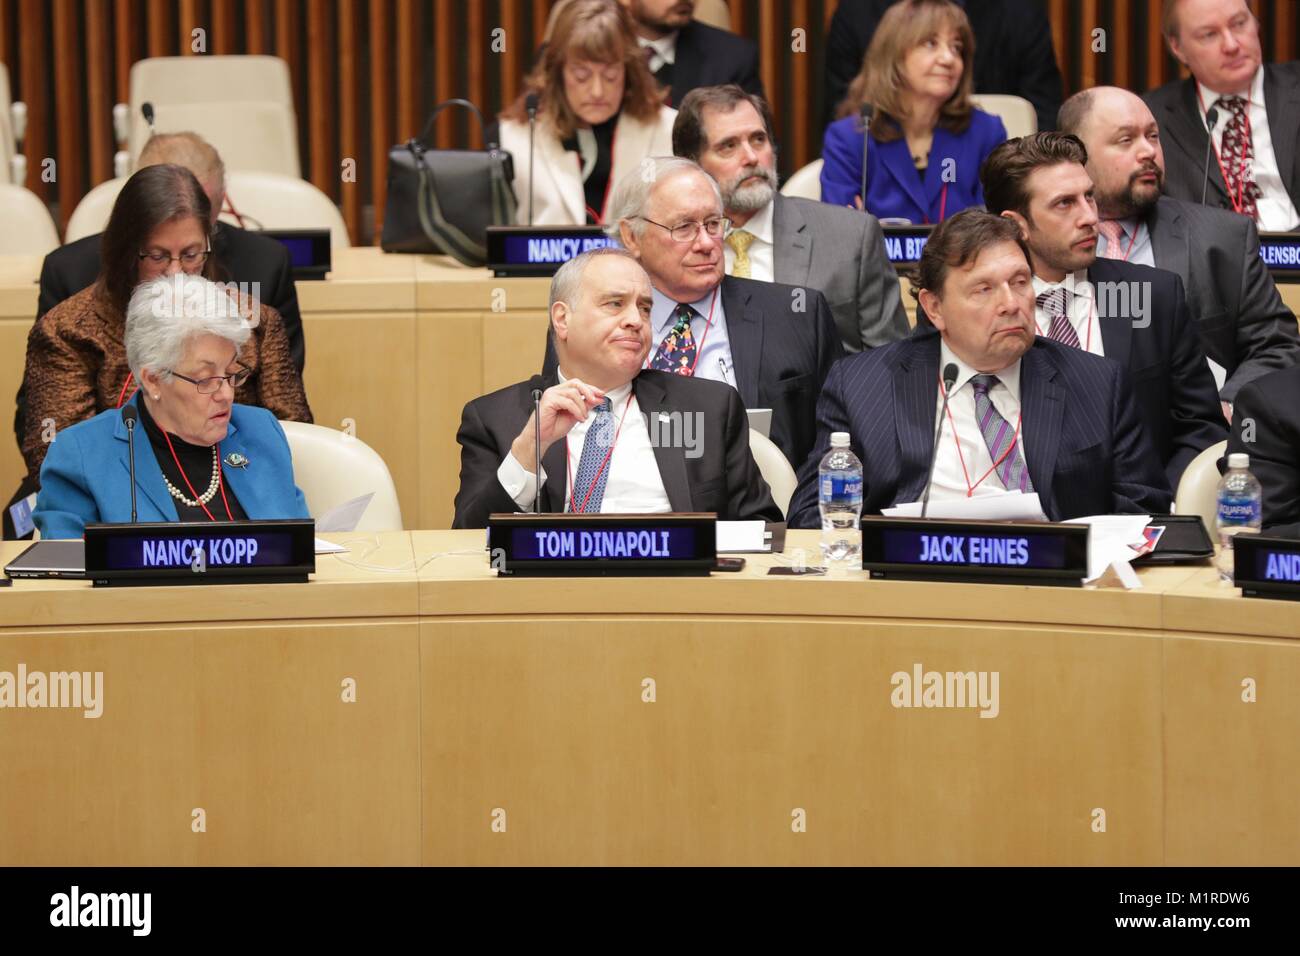 United Nations, New York, USA, January 31 2018 - Thomas P. DiNapoli the Comptroller of the state of New York During the 2018 Investor Summit on Climate Risk on the theme Capturing the Investment Opportunities of the Paris Agreement today at the UN Headquarters in New York City. Photo: Luiz Rampelotto/EuropaNewswire *** Local Caption *** 00005953 | usage worldwide Credit: dpa picture alliance/Alamy Live News Stock Photo